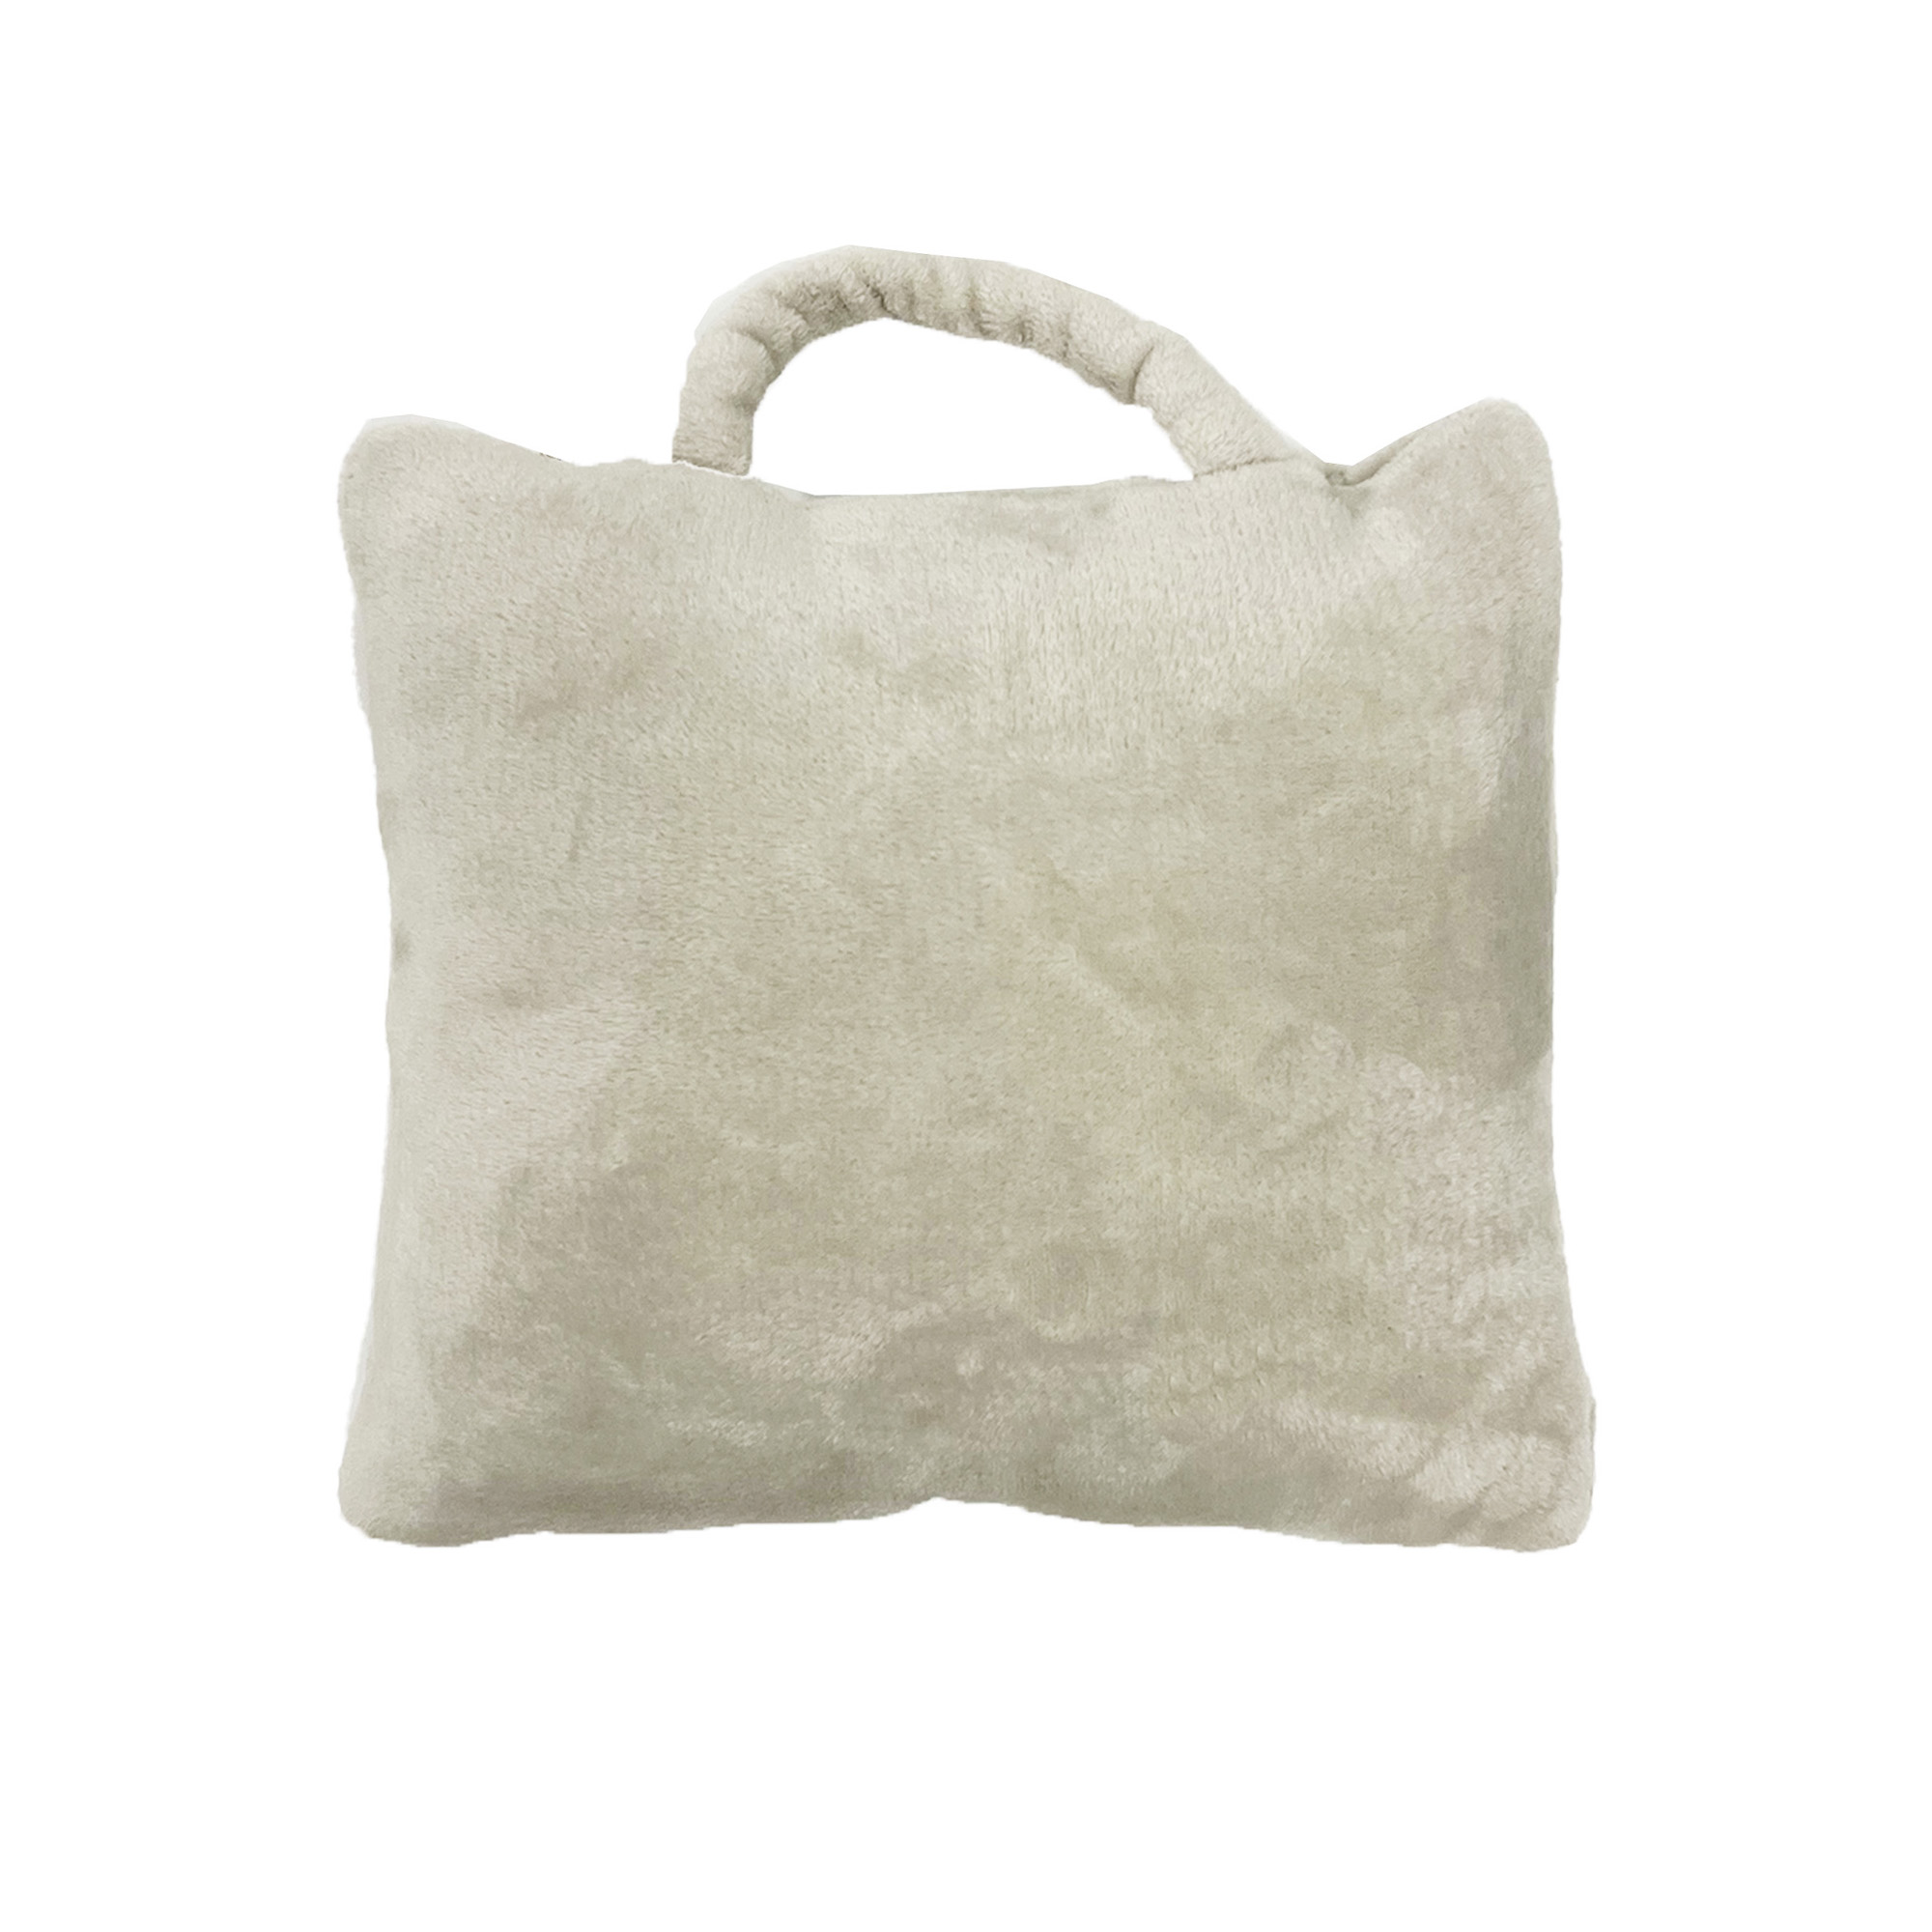 TESSA - Plaid to Go - 130x150 cm - Pumice Stone - ideal for traveling - folds into handy bag